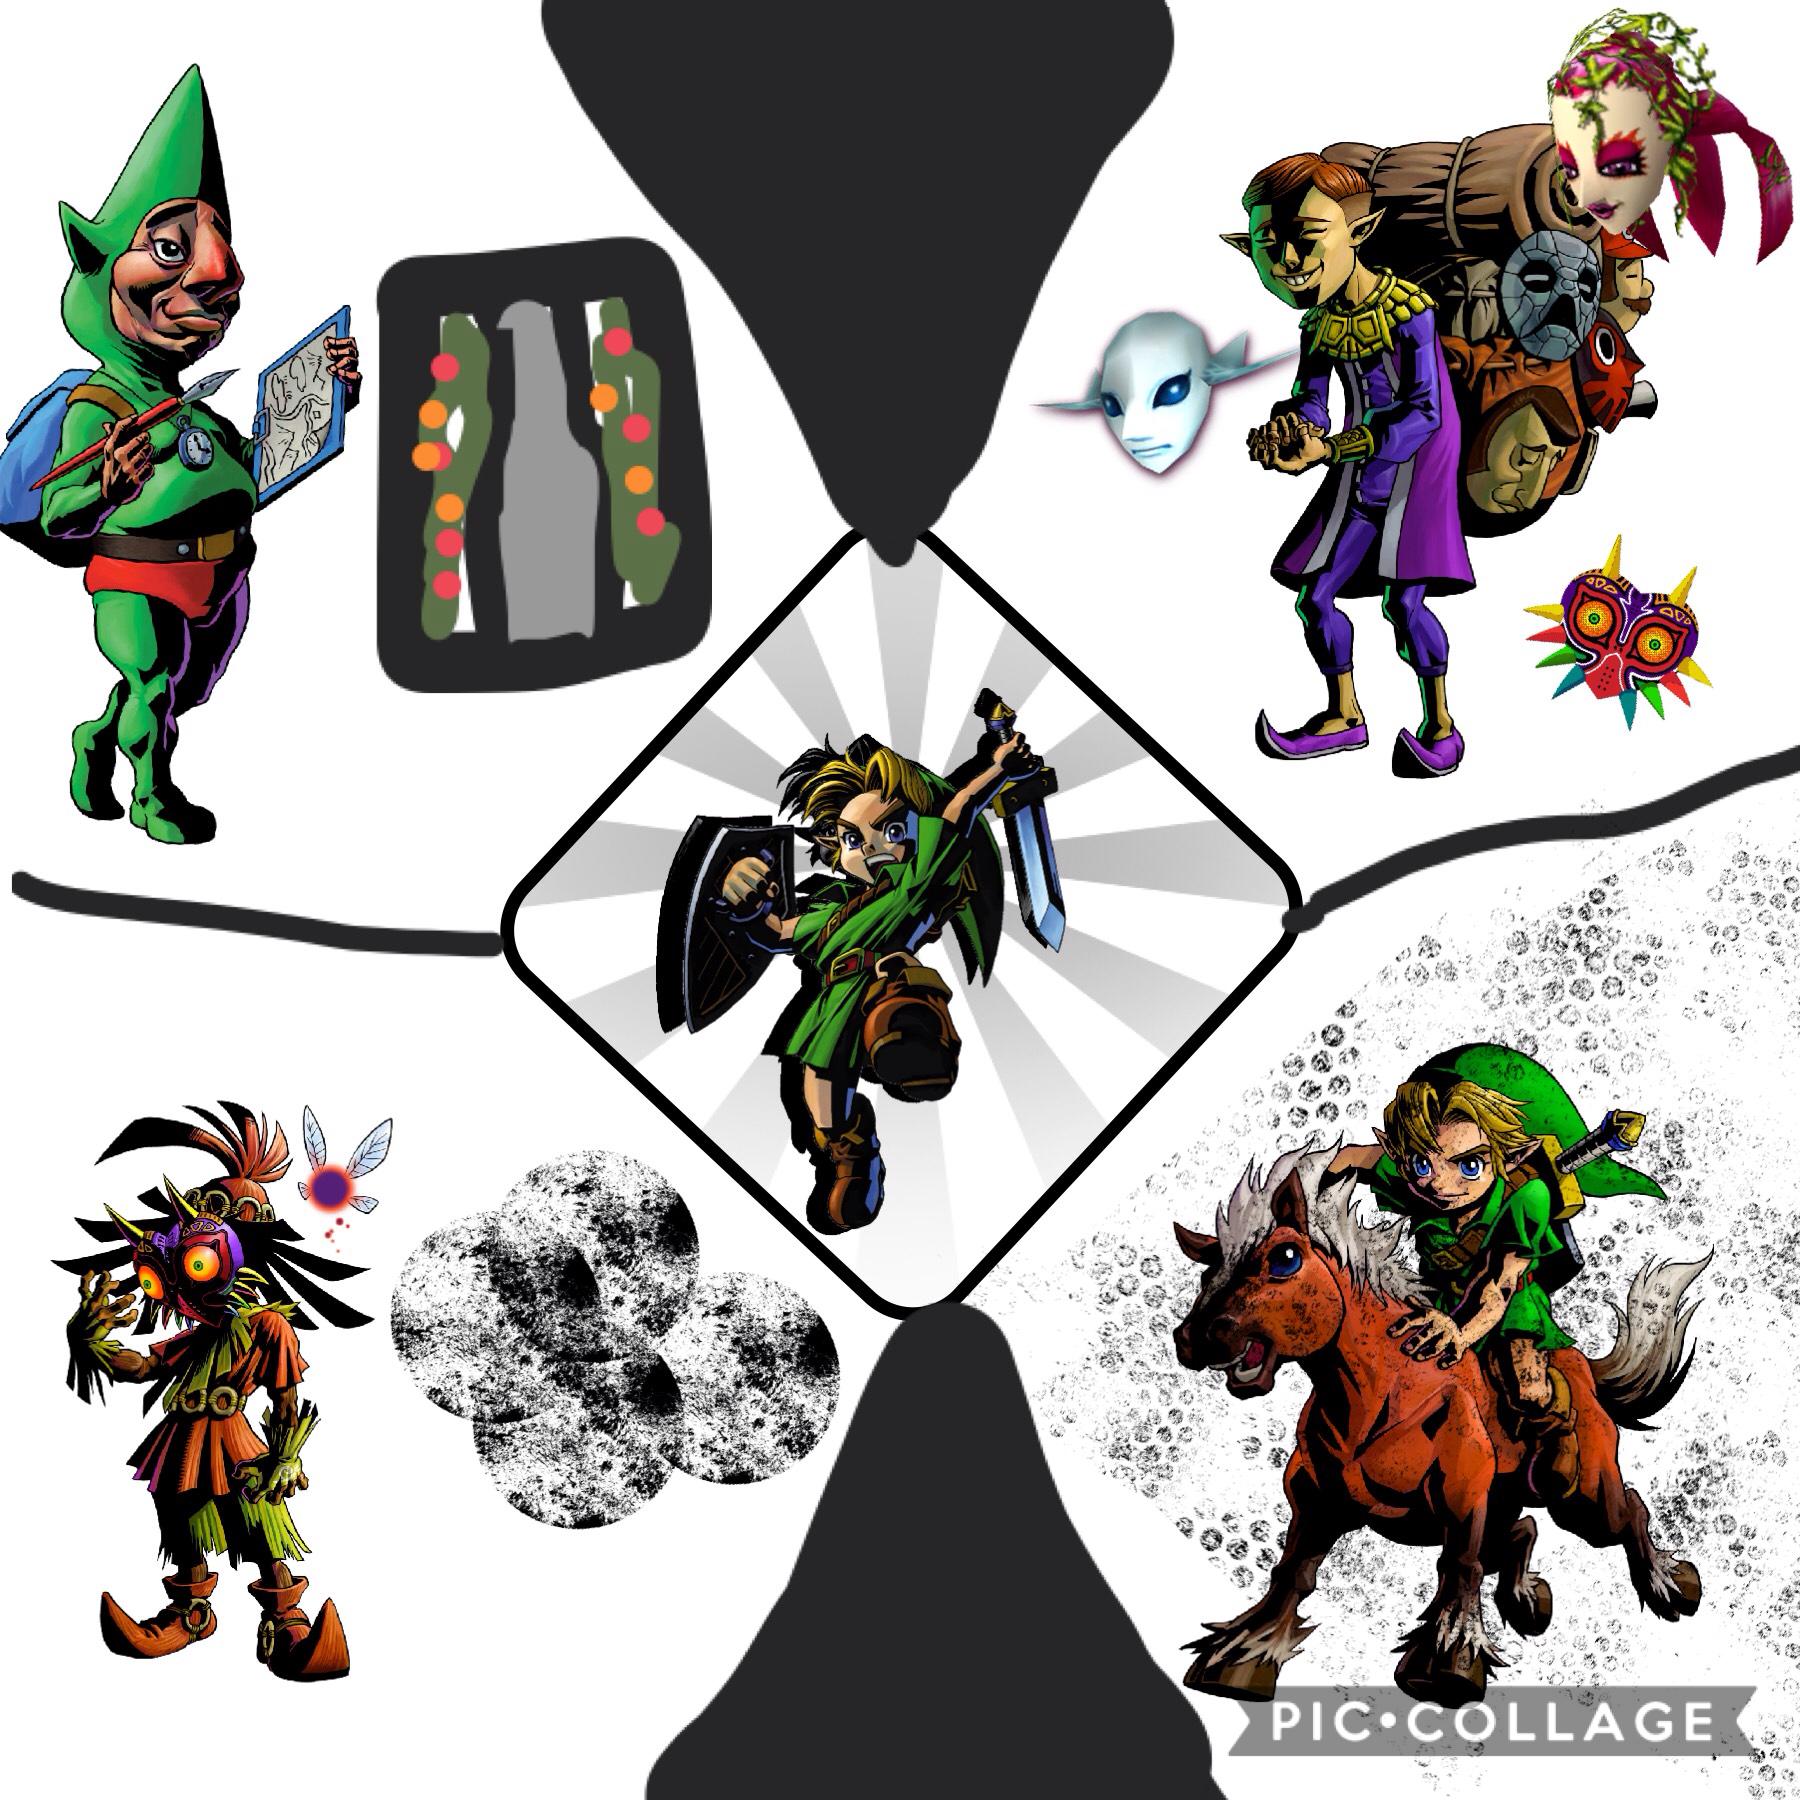 Started playing majoras mask and loved it 😍😍😍